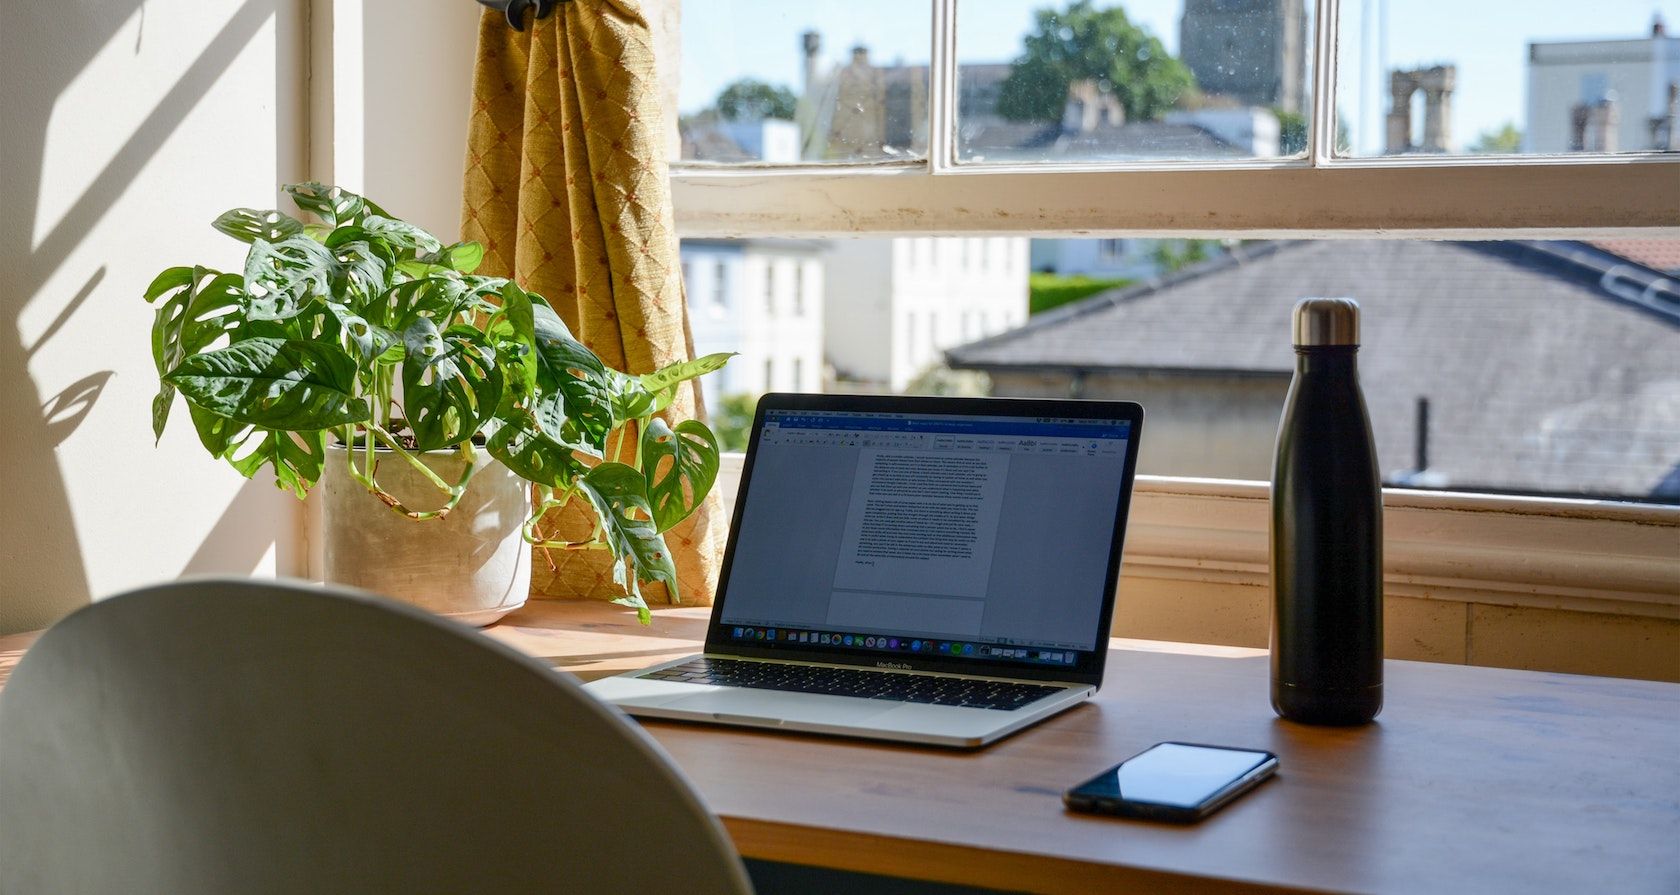 A student's Macbook, iPhone, water bottle, and plant on their desk by a window